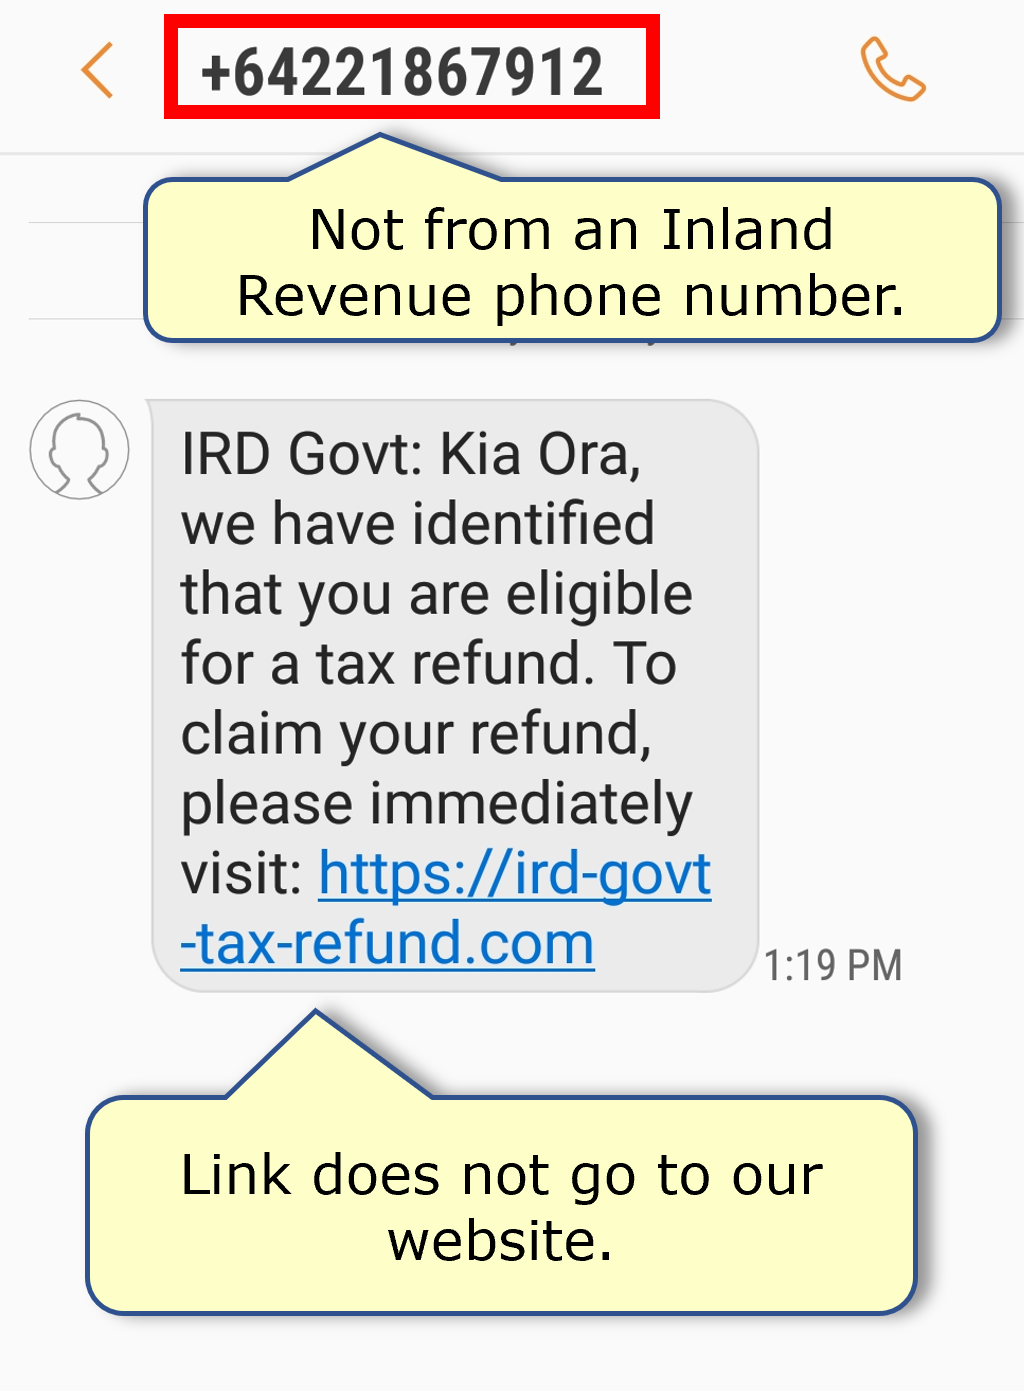 A text scam that is not from any of our numbers with a link that does not go to our website.